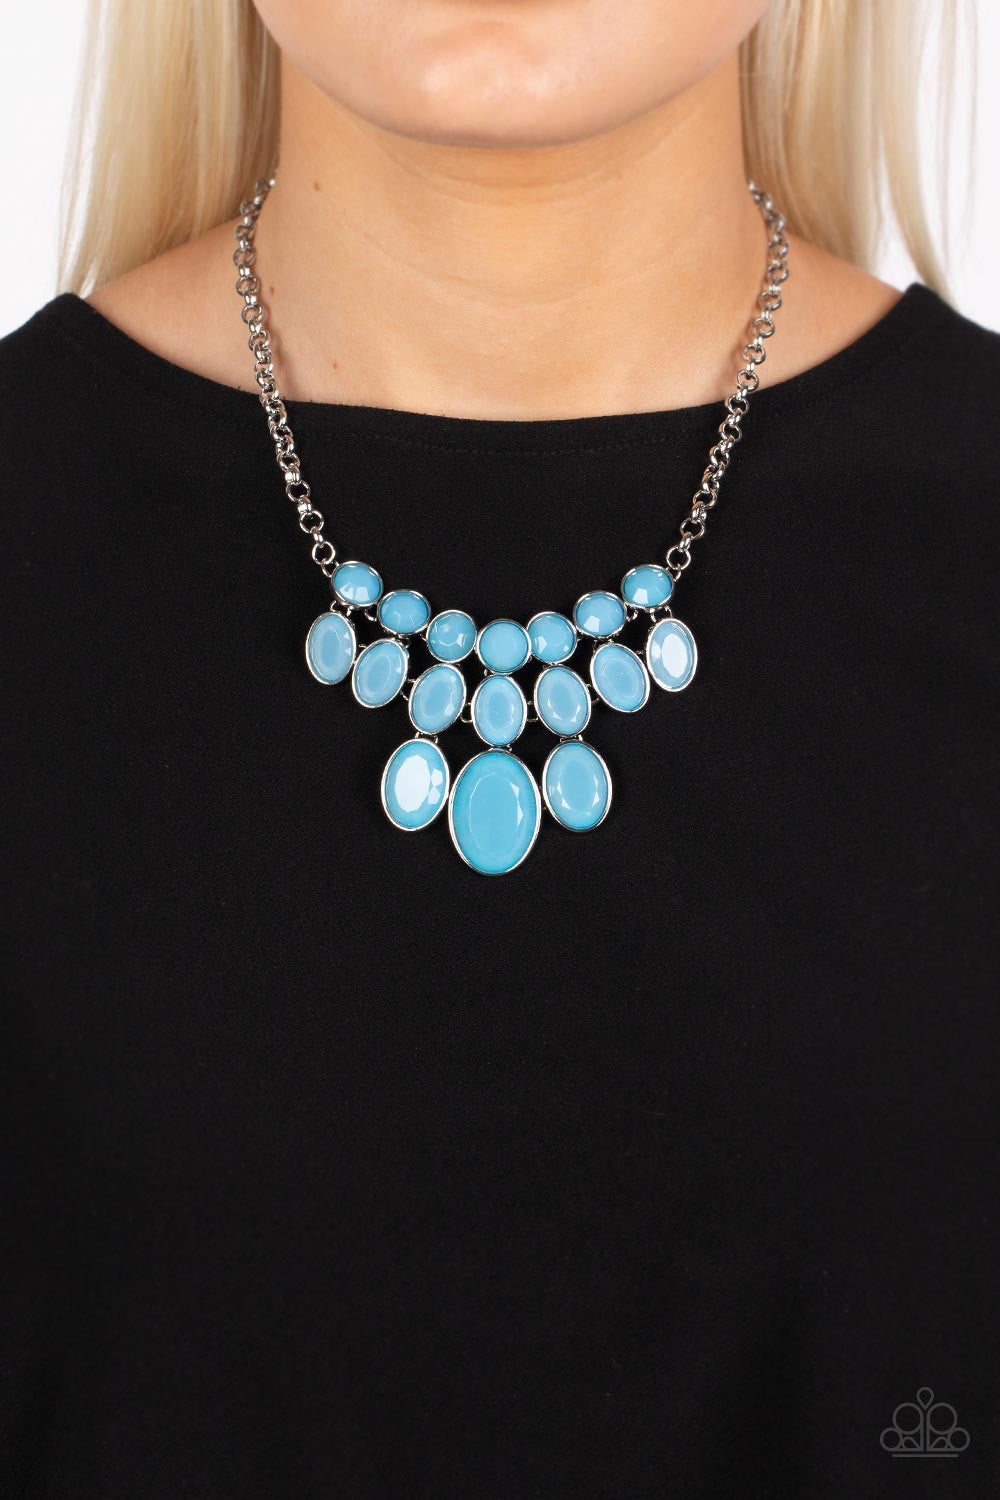 Paparazzi Jewelry Images - Delectable Daydream - Blue Necklace 